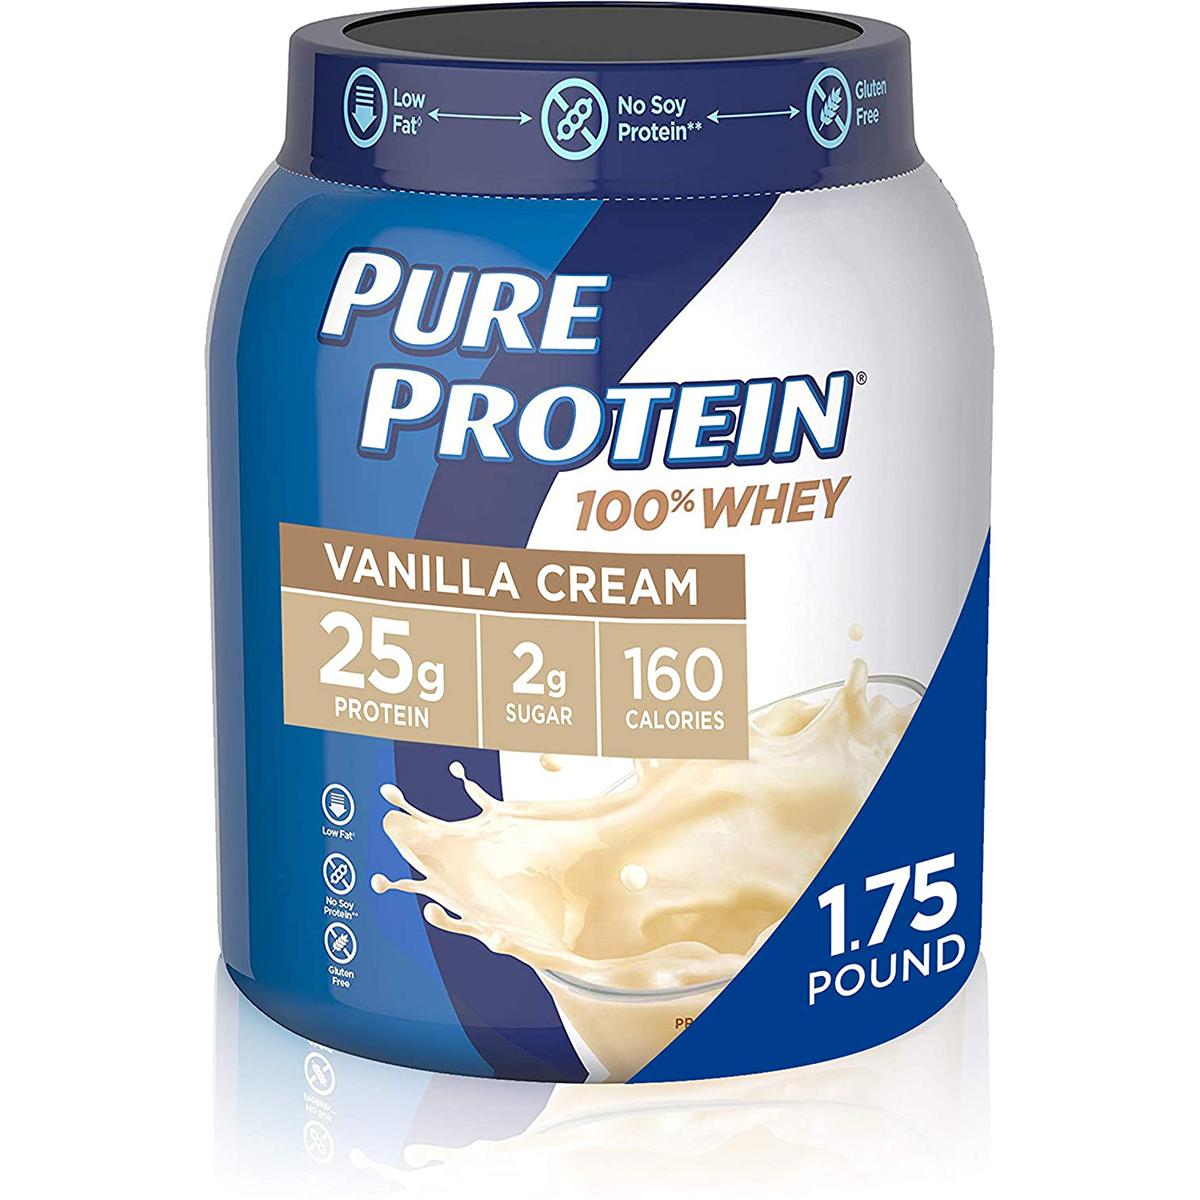 Pure Protein Gluten Free Whey Protein Powder for $10.25 Shipped